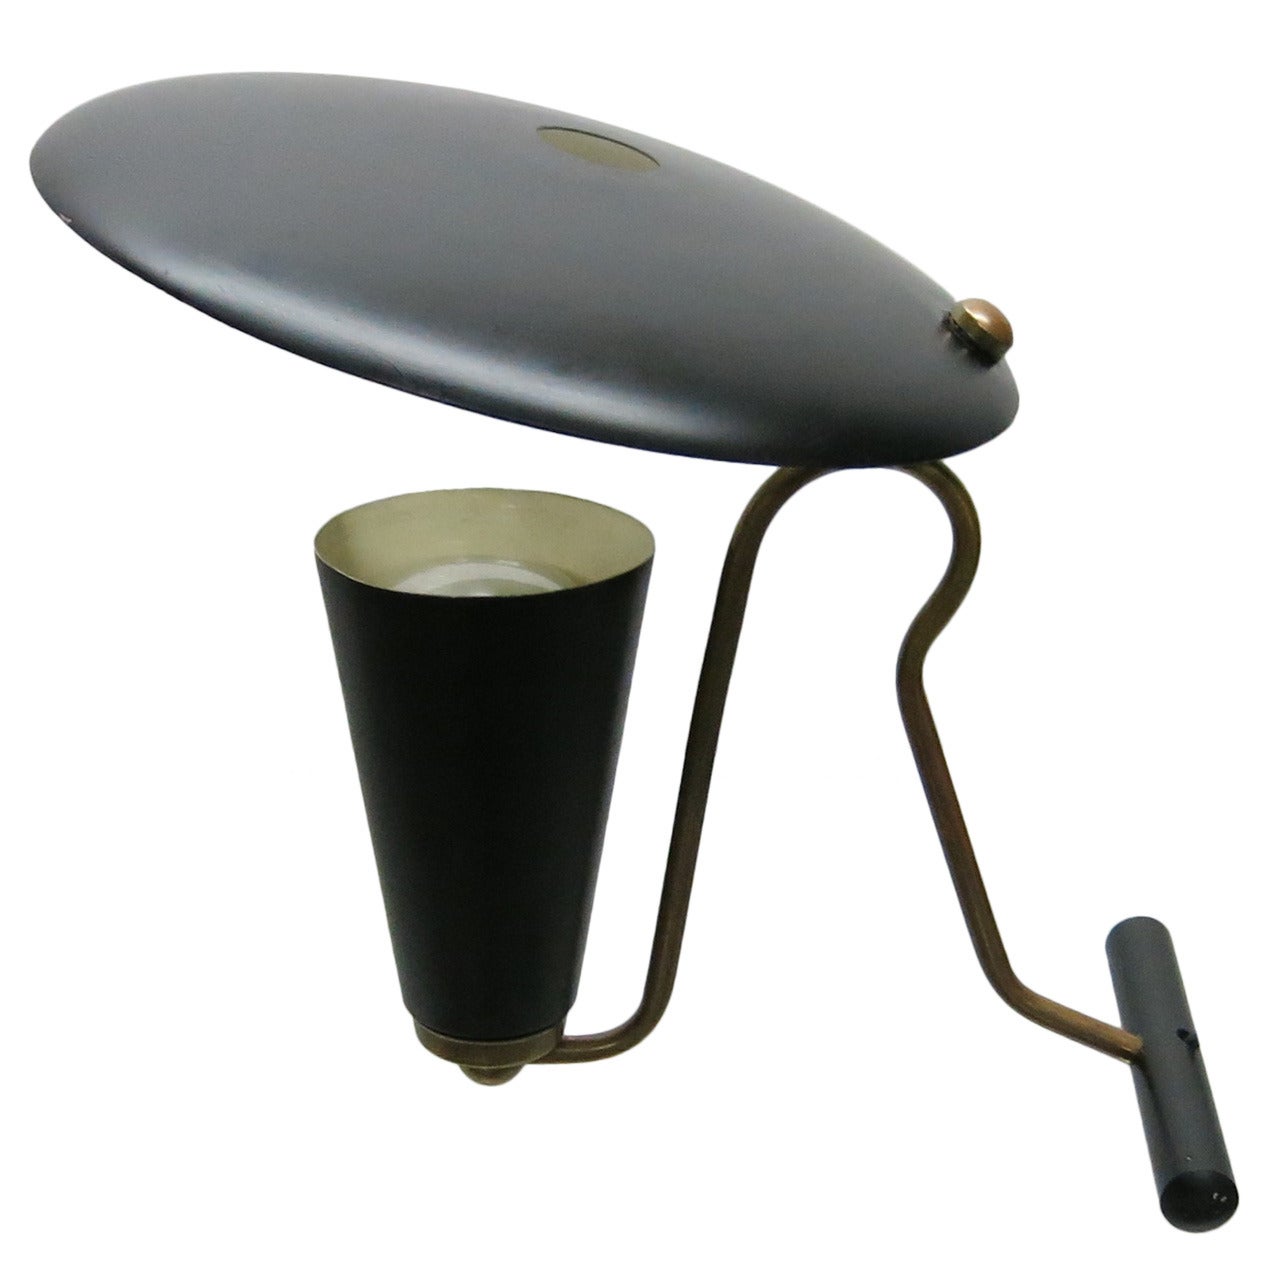 Small Desk Lamp by Jaques Biny, Made in France, circa 1950